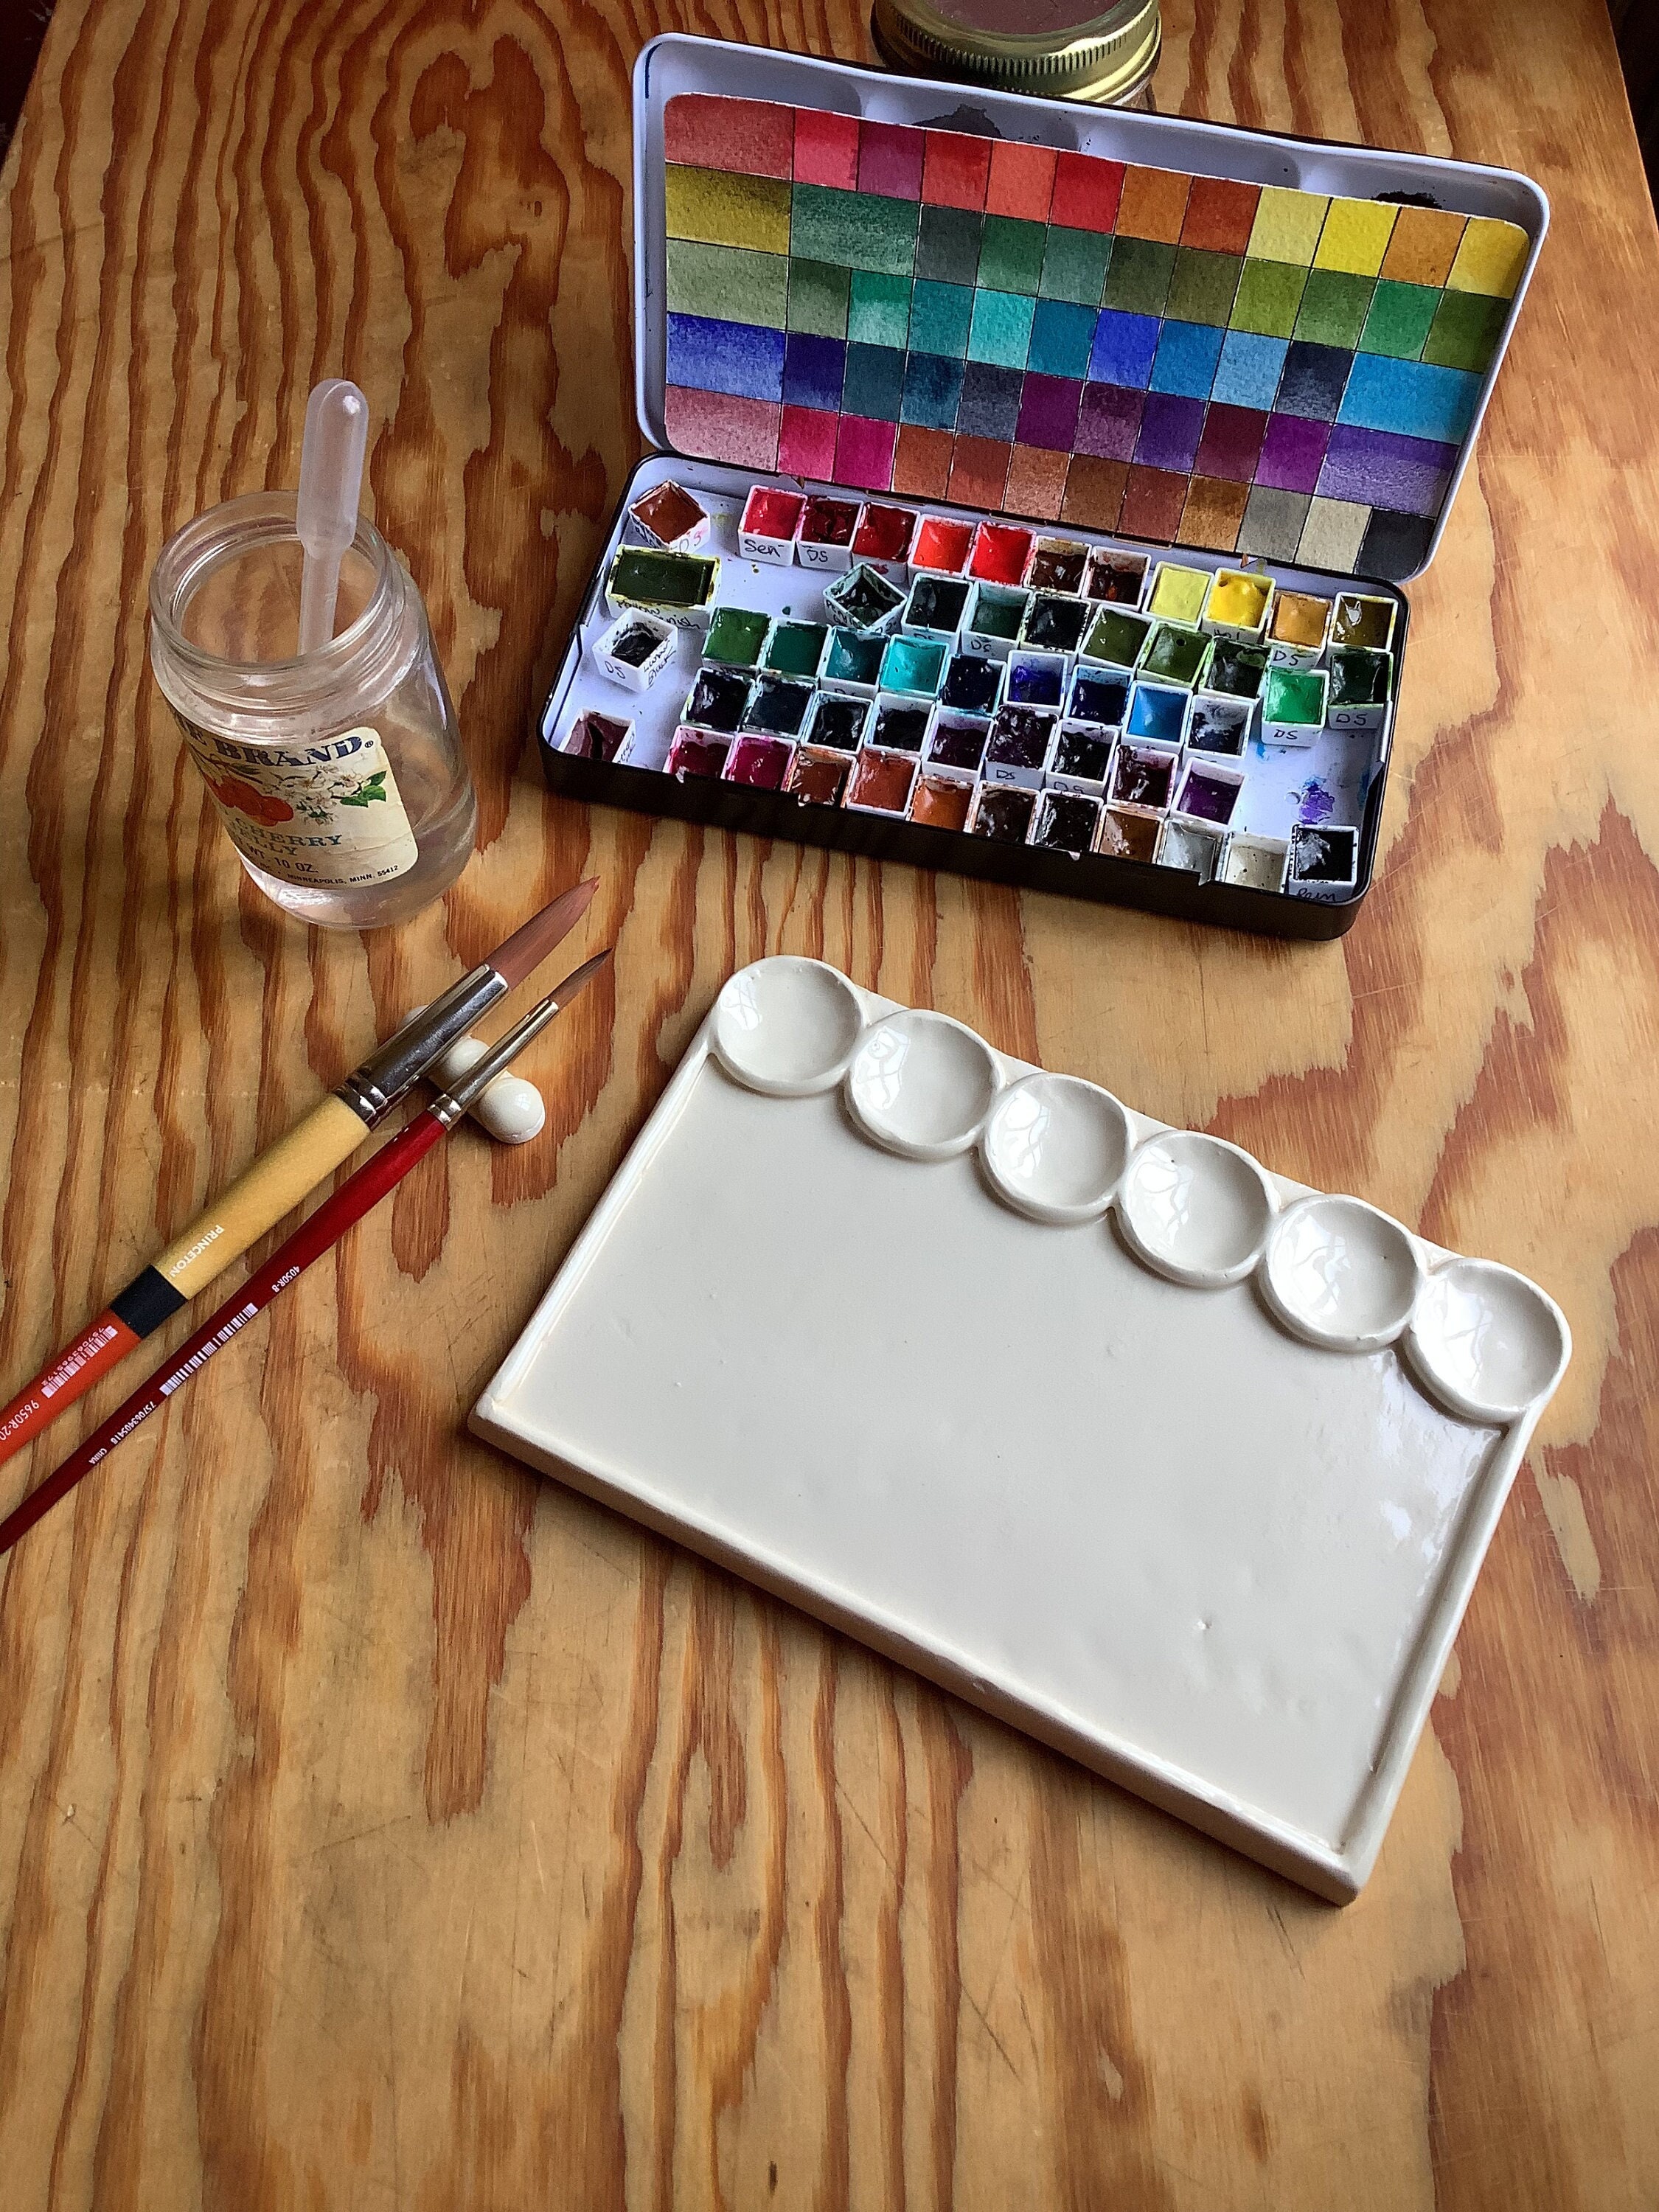 8 Inch Porcelain Watercolor Palette, Mixing Ceramic Watercolor Palette, Mixing  Tray Paint Palett for Watercolor Gouache Acrylic Oil Painting 13-Well 13  Wells